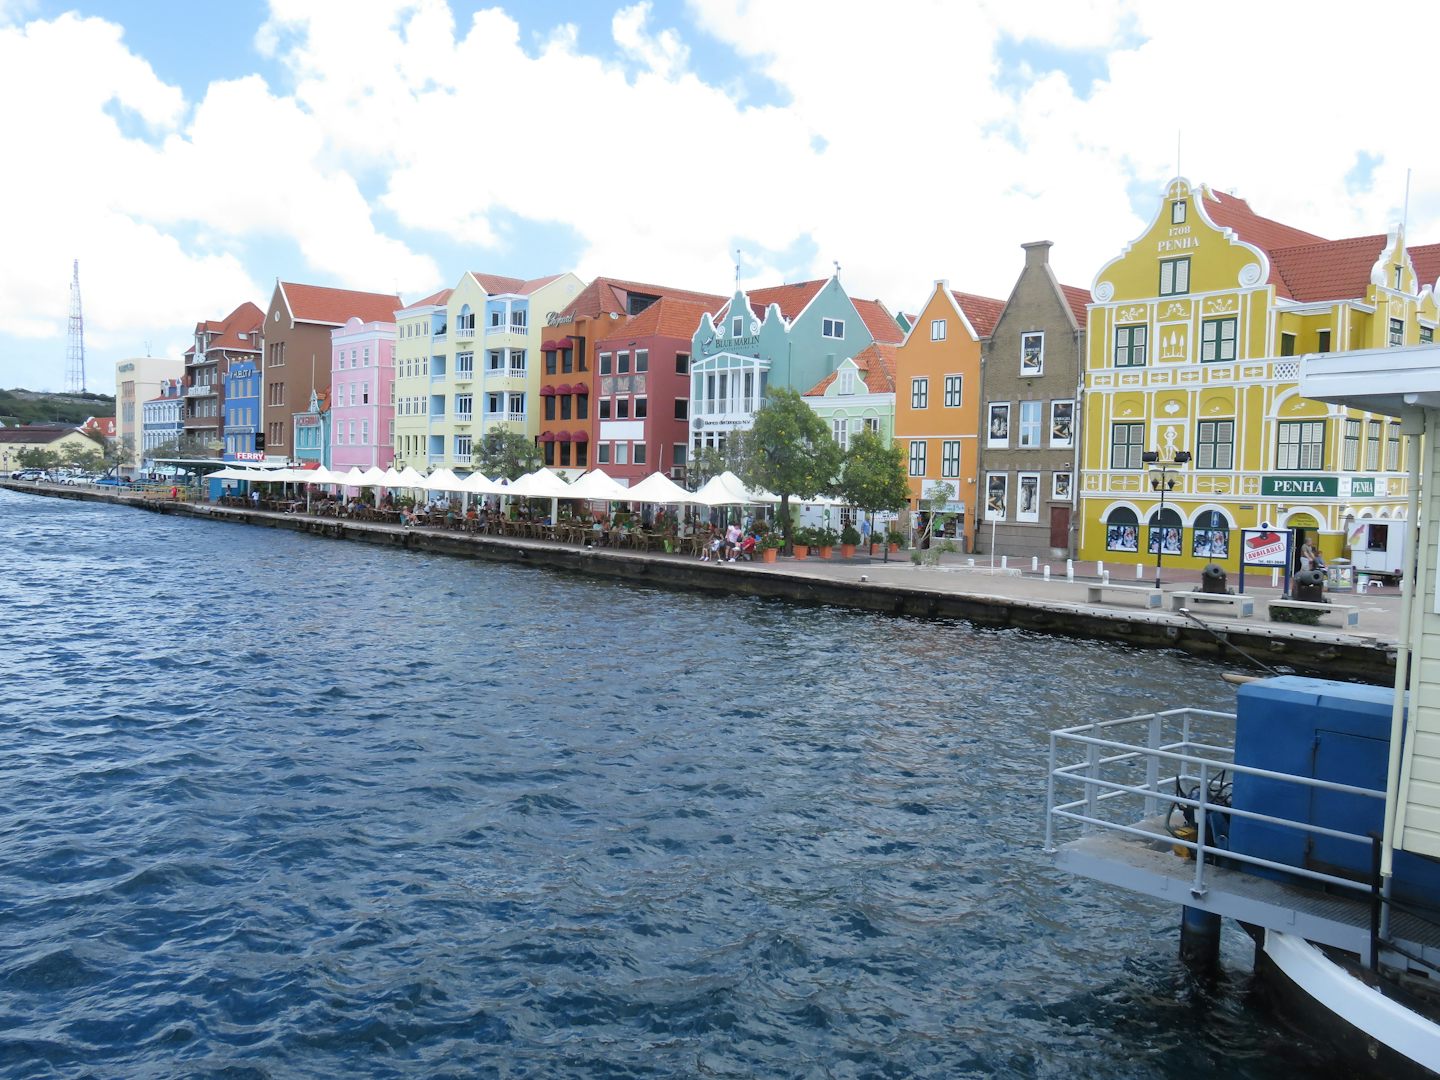 The famous river view setting in Curacao.